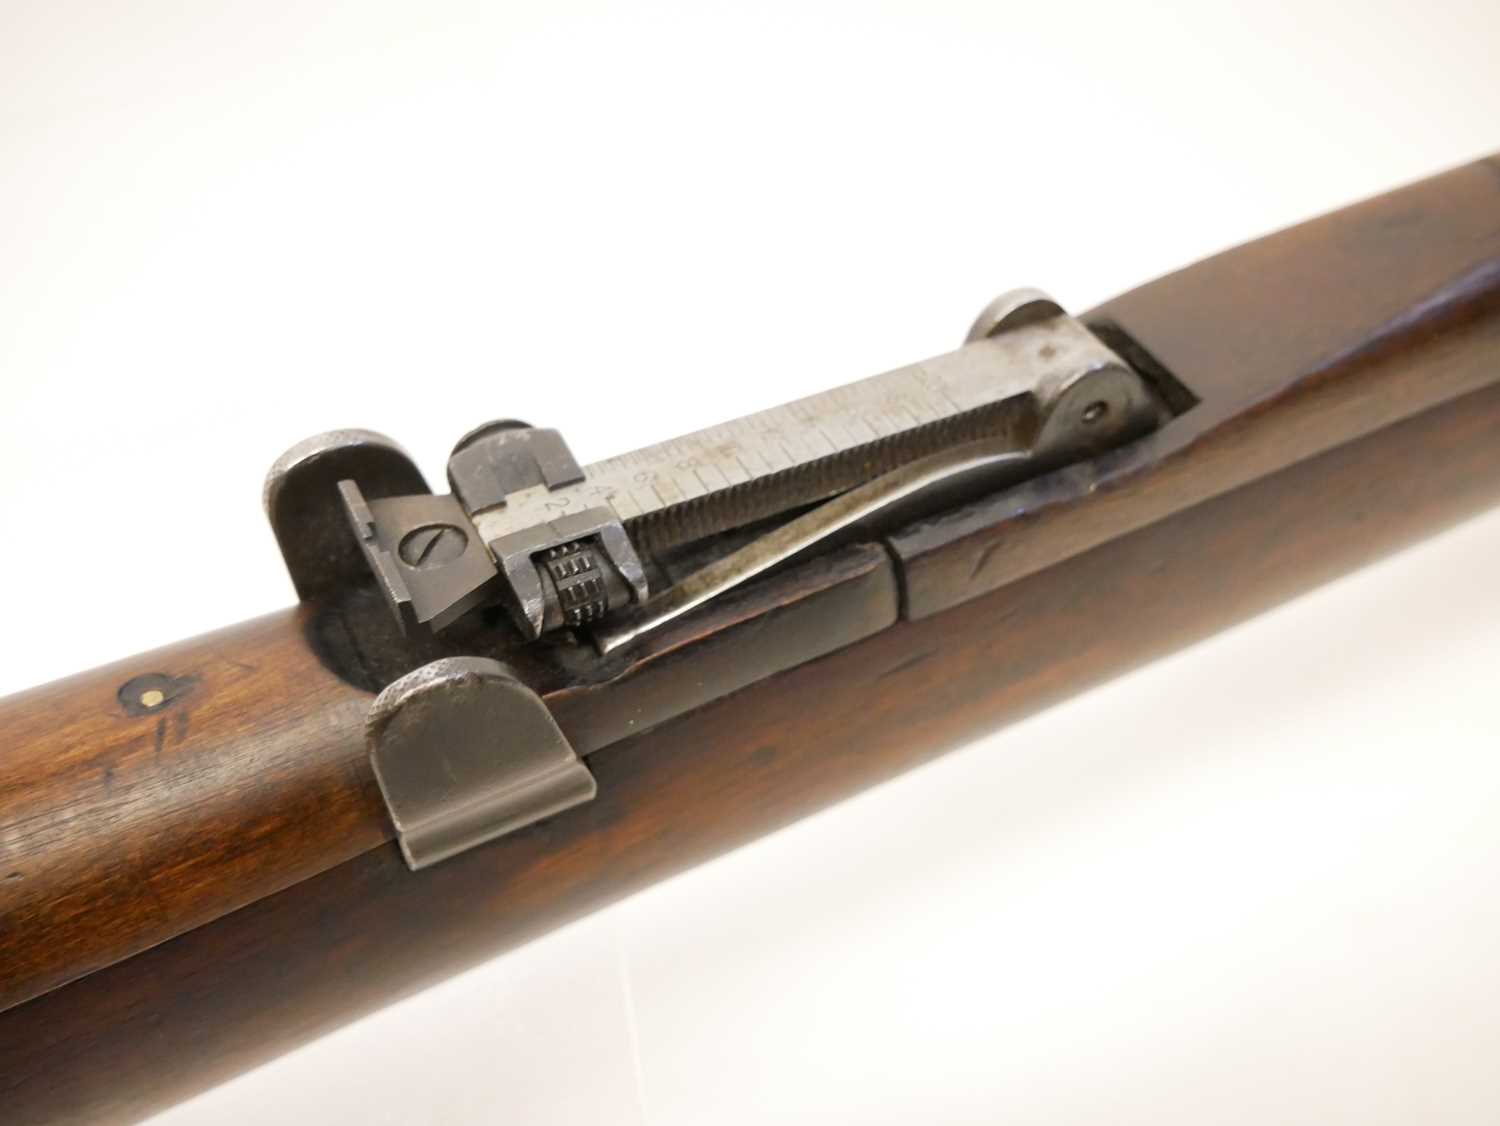 Deactivated Lee Enfield SMLE .303 bolt action rifle - Image 9 of 14